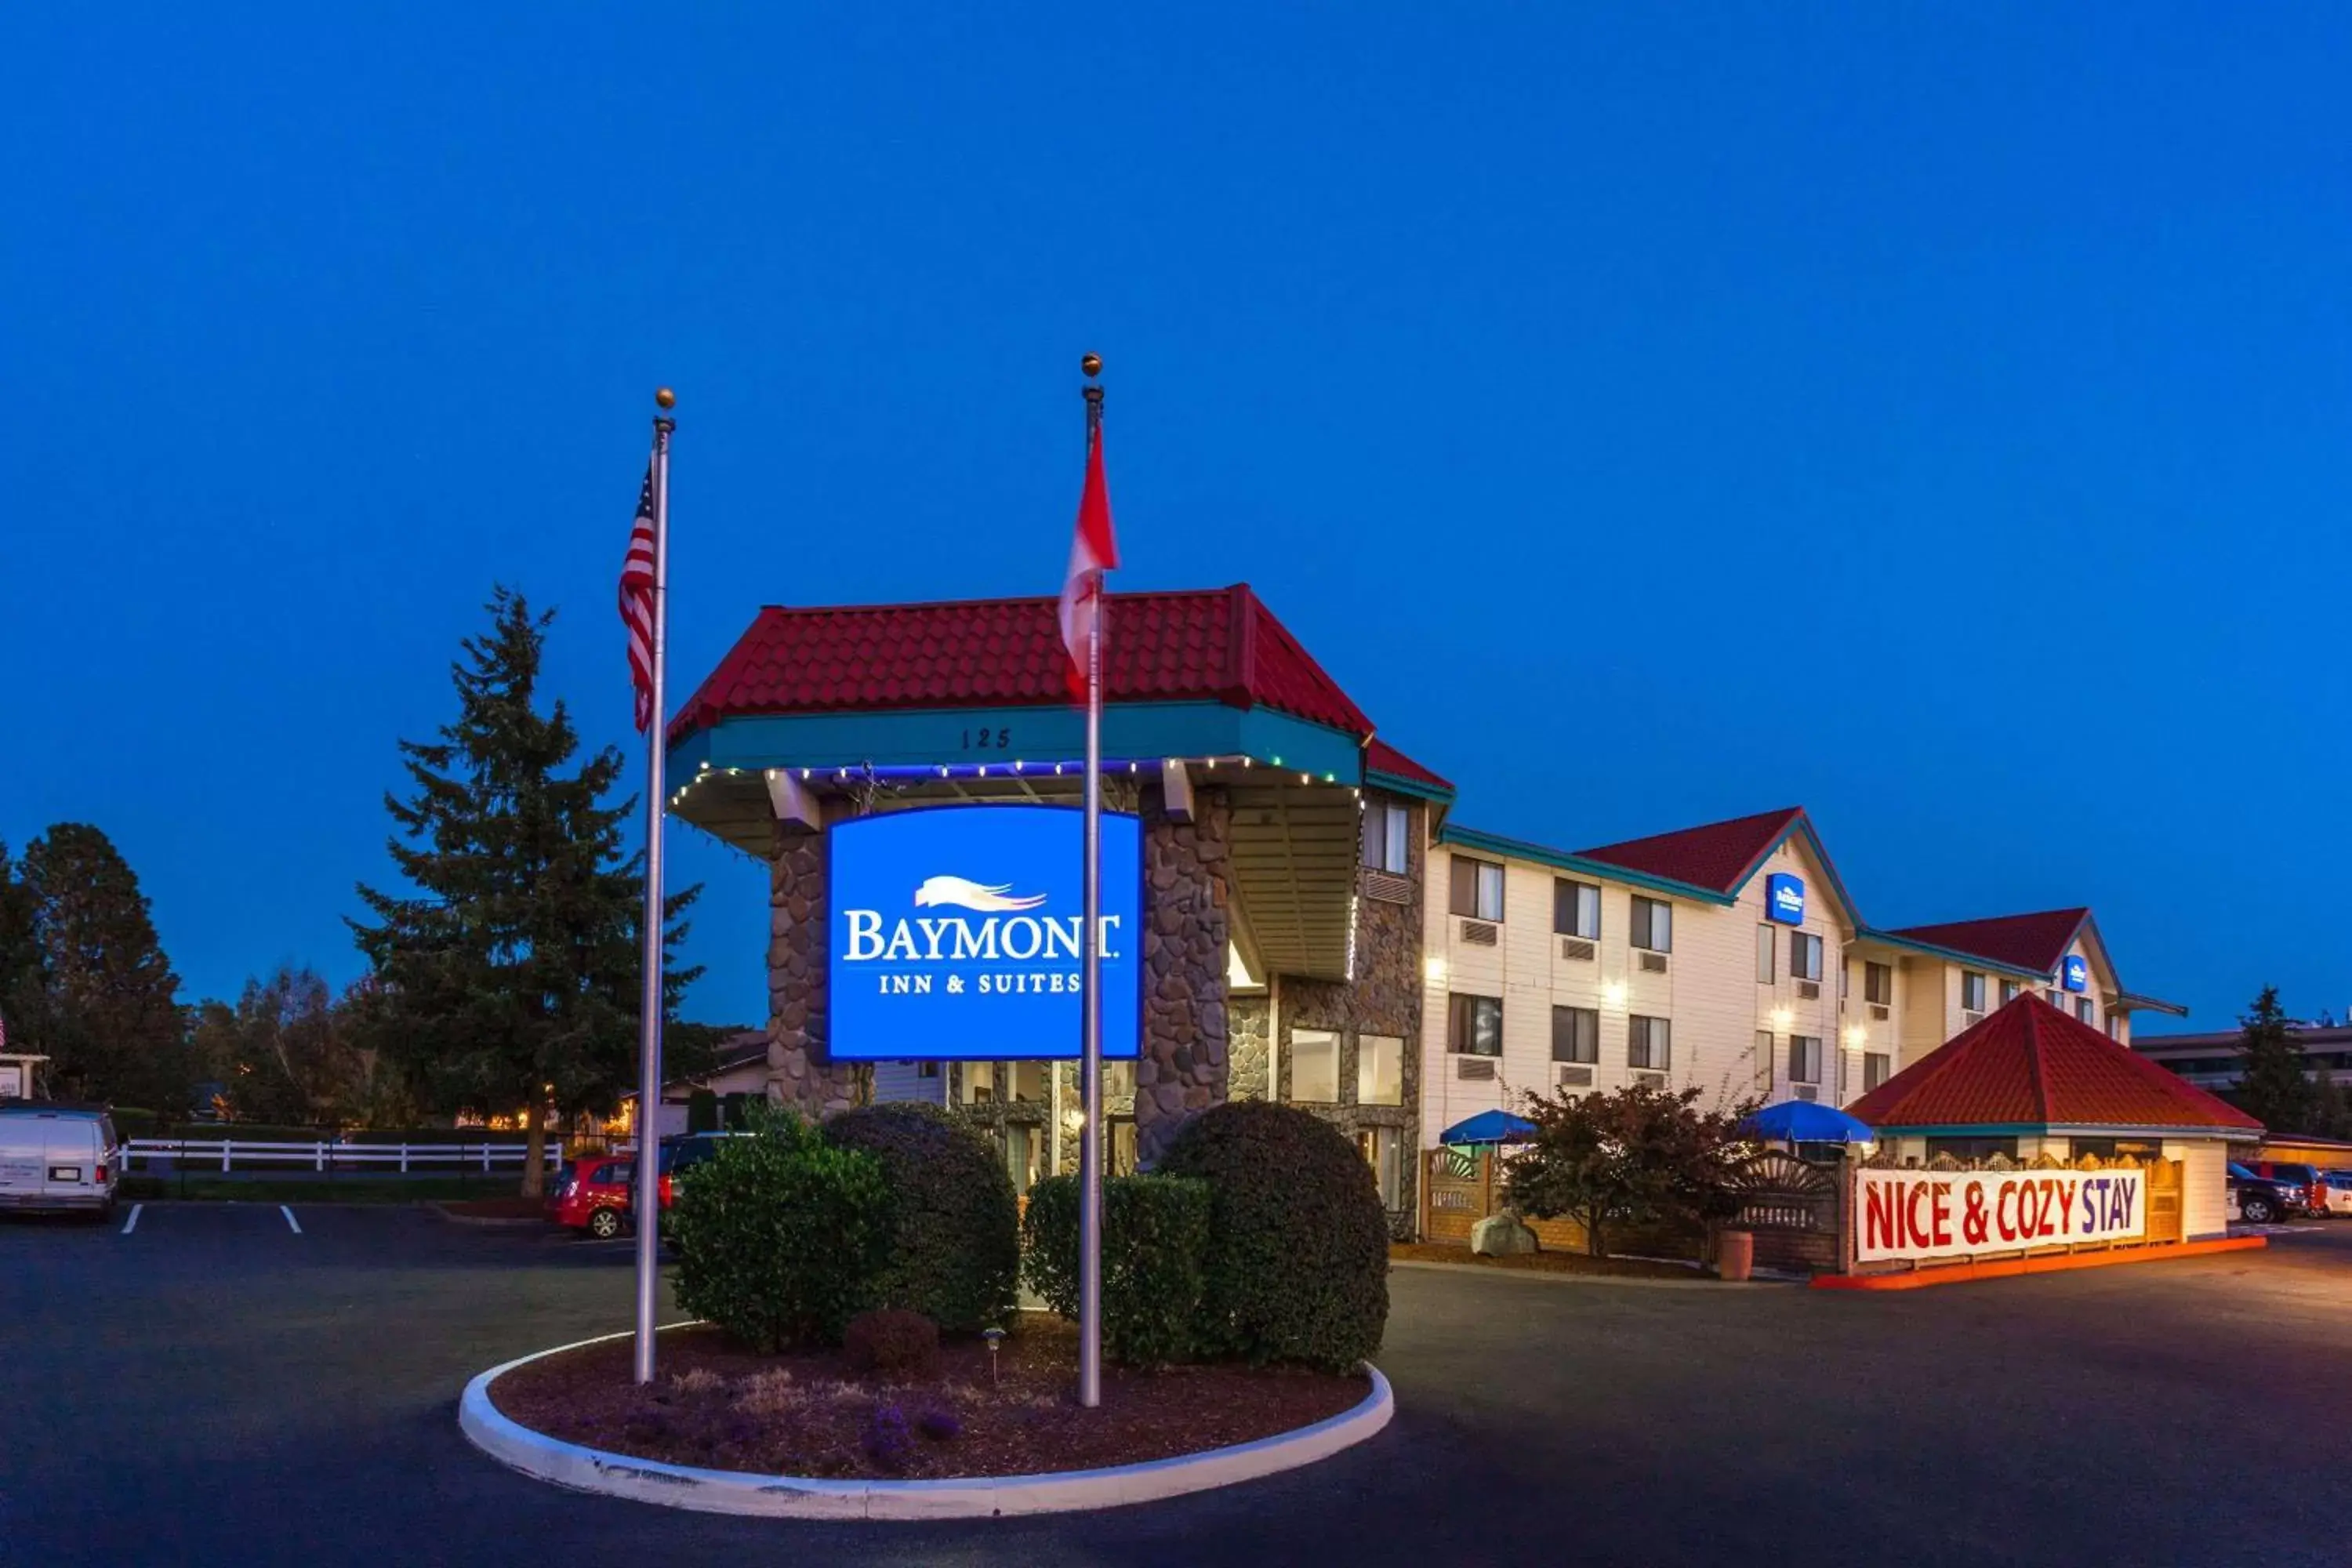 Property building in Baymont INN & Suites by Wyndham